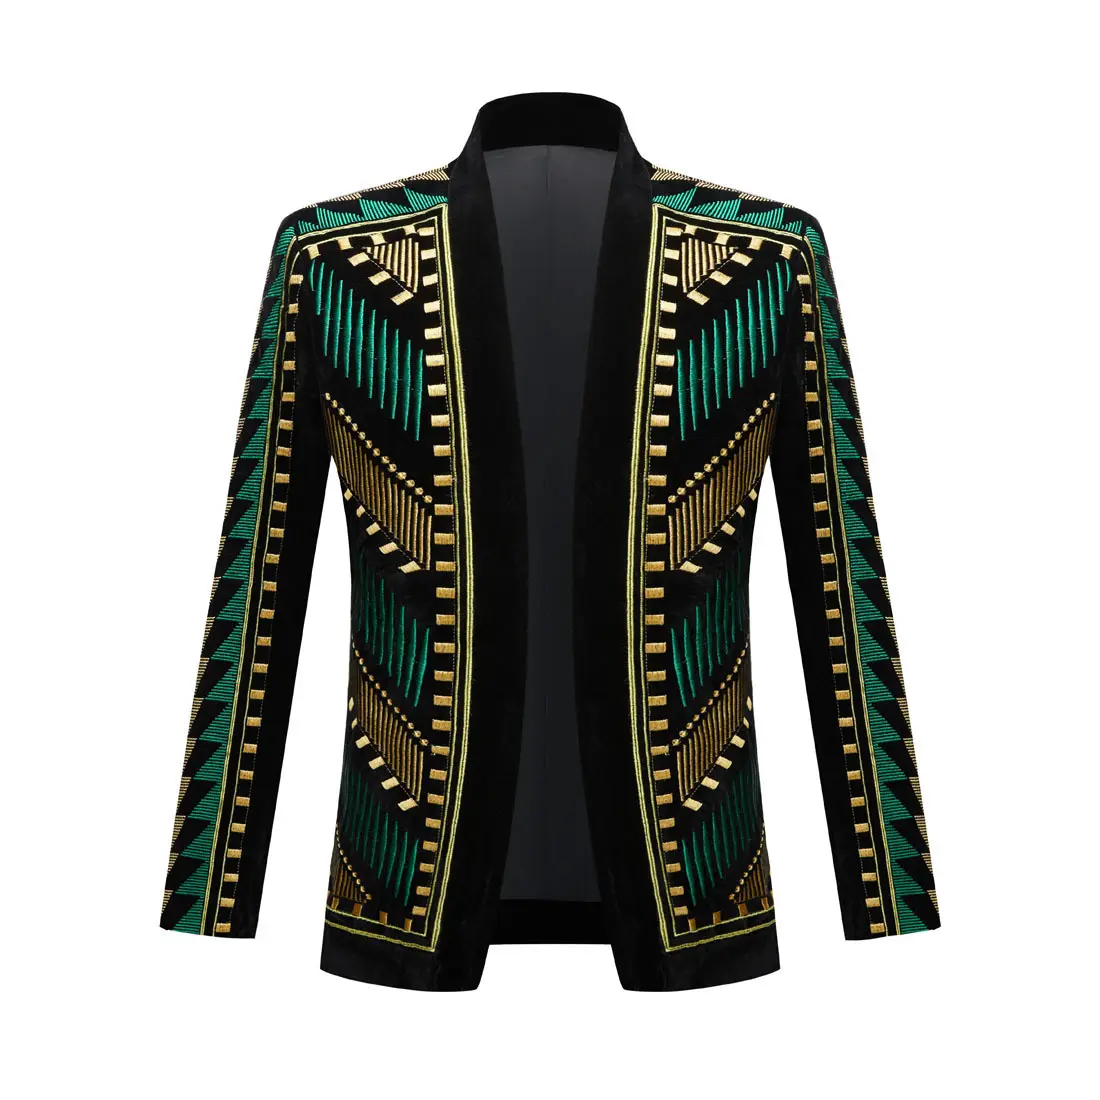 Men's suit jacket Singer's stage performance costume Retro gold embroidery coat